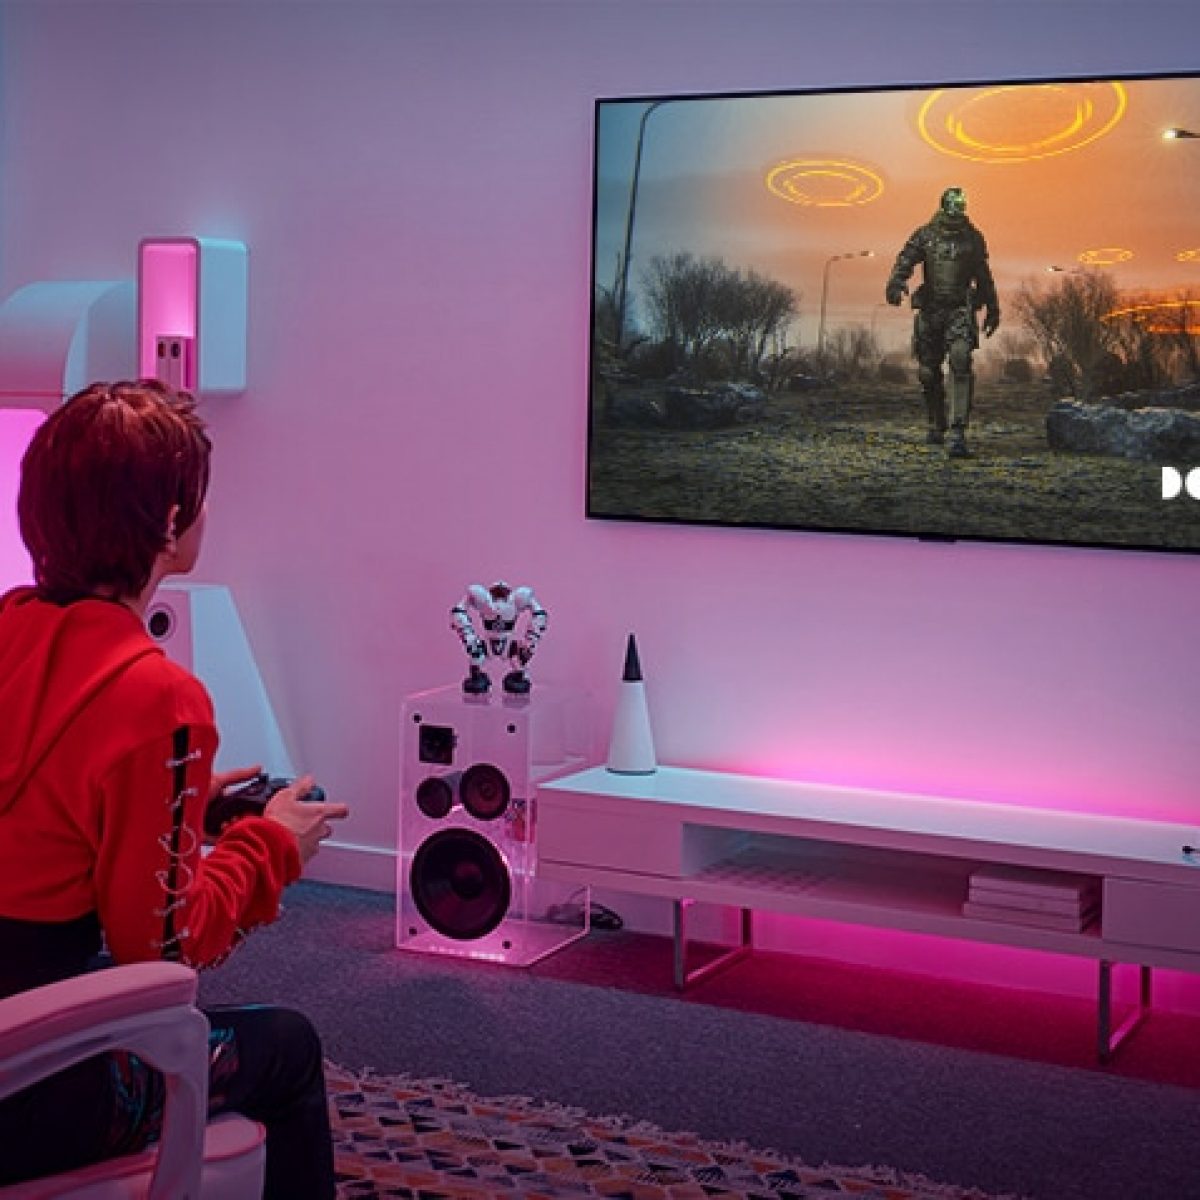 What to look for if you're buying a TV for gaming